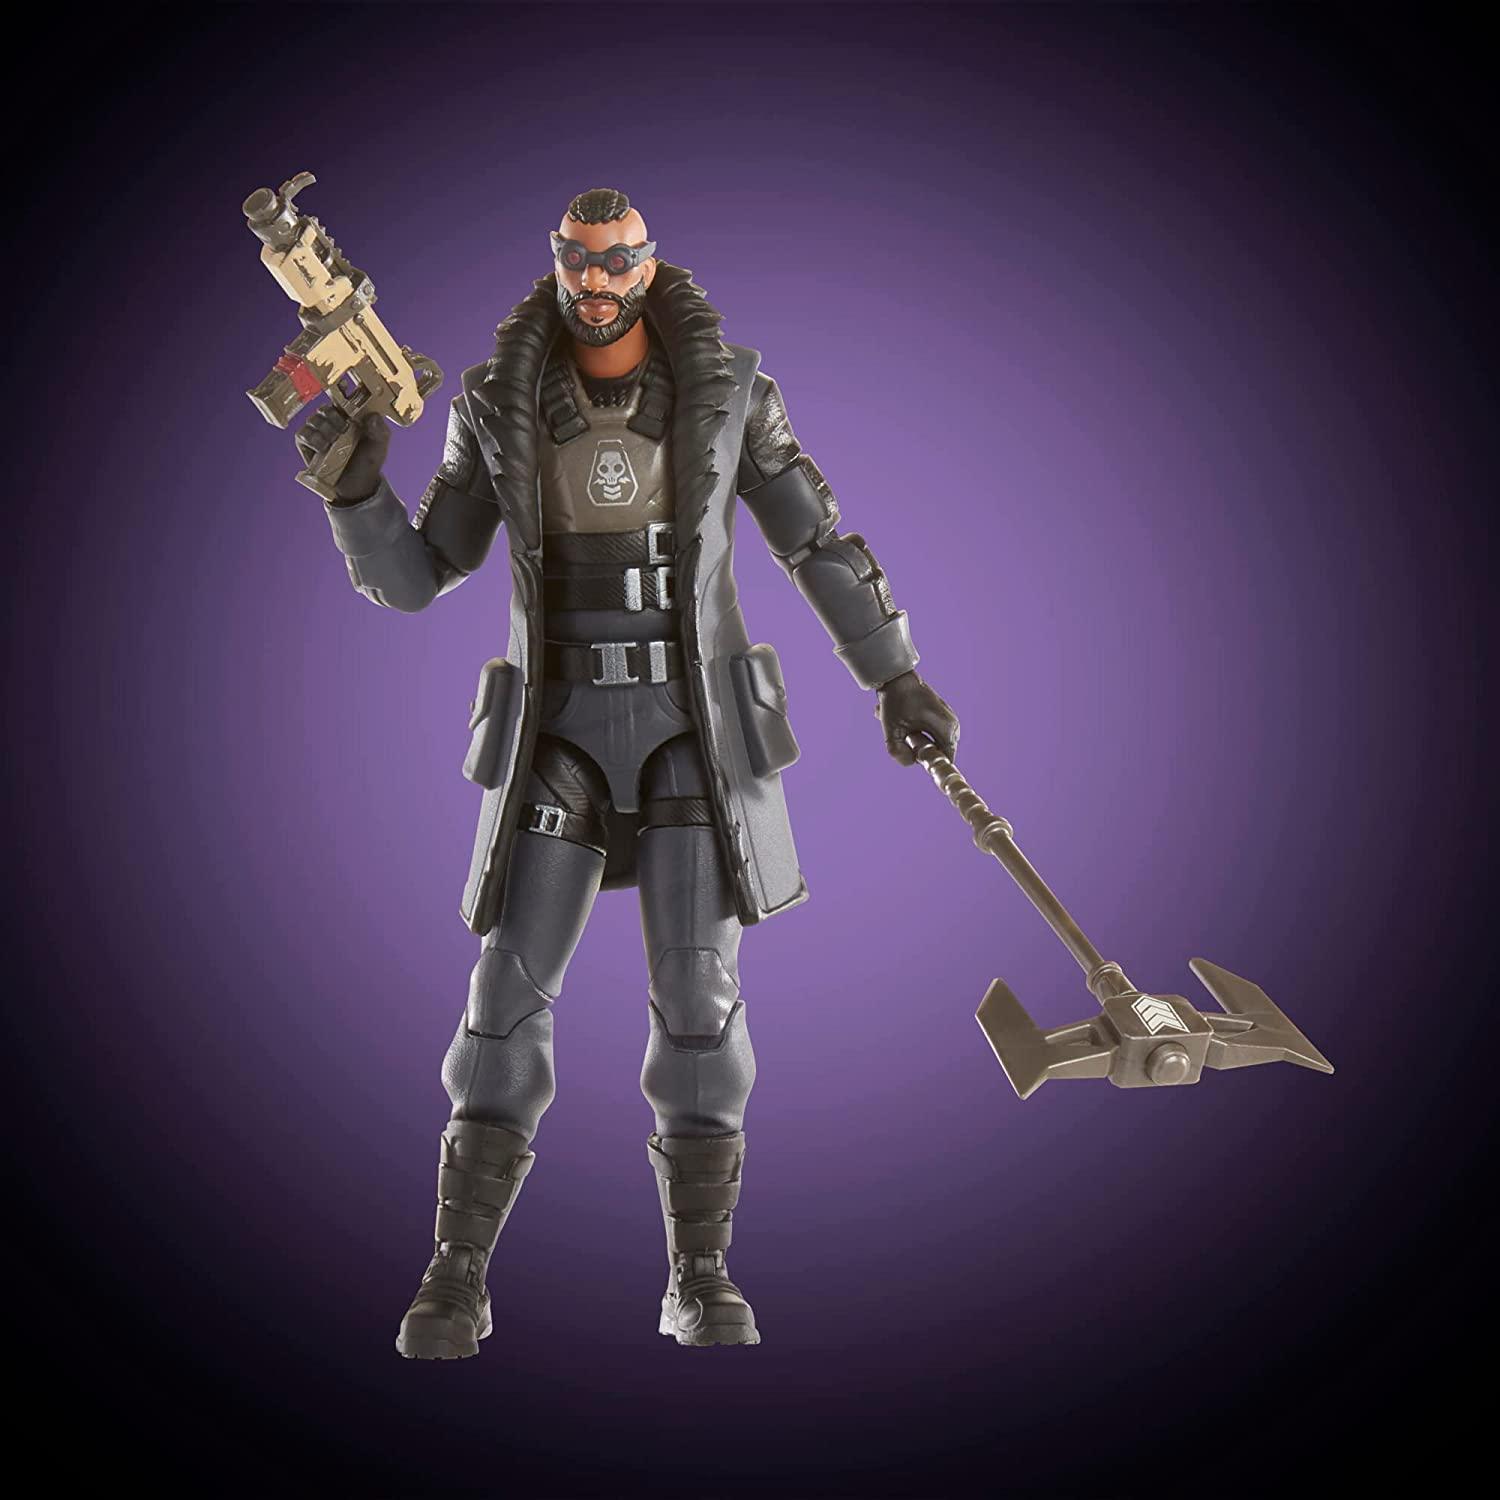 Hasbro - Fortnite Victory Royale Series - Renegade Shadow Action Figure - The Card Vault